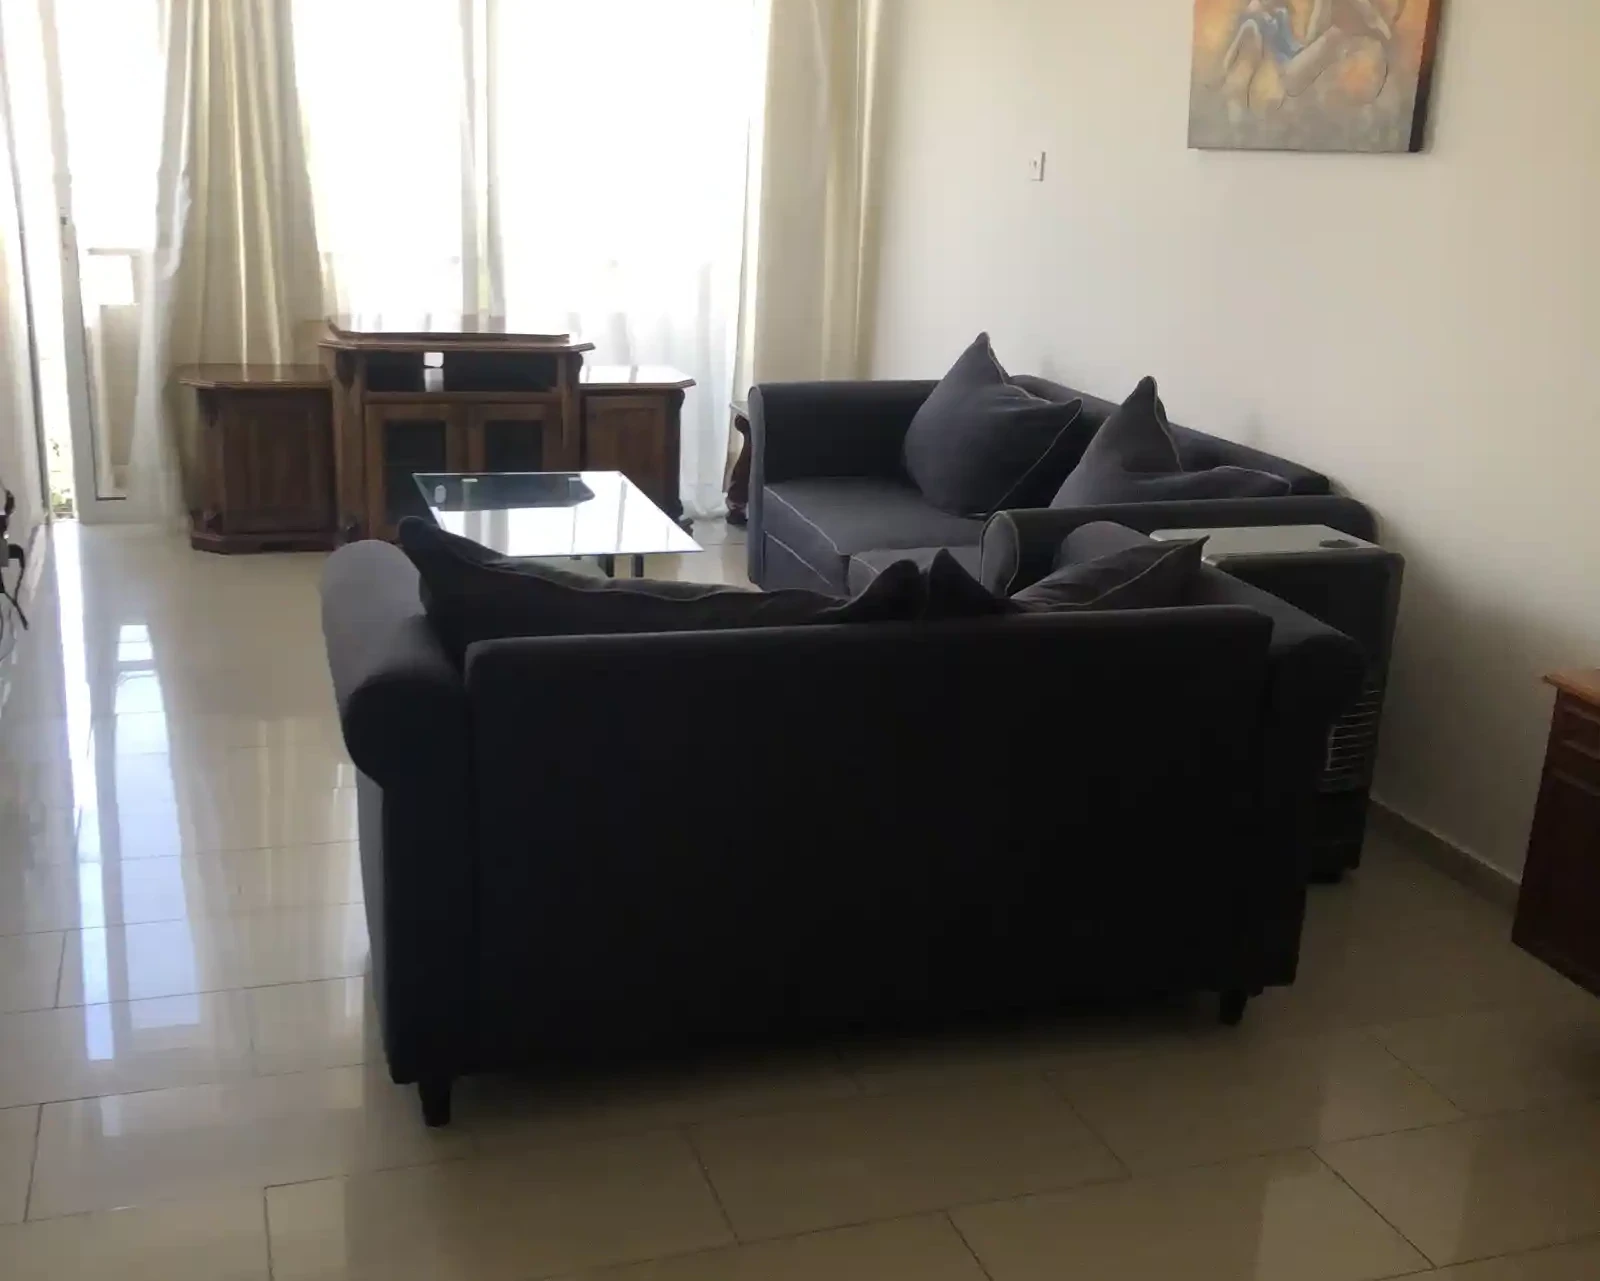 1-bedroom apartment to rent €1.050, image 1